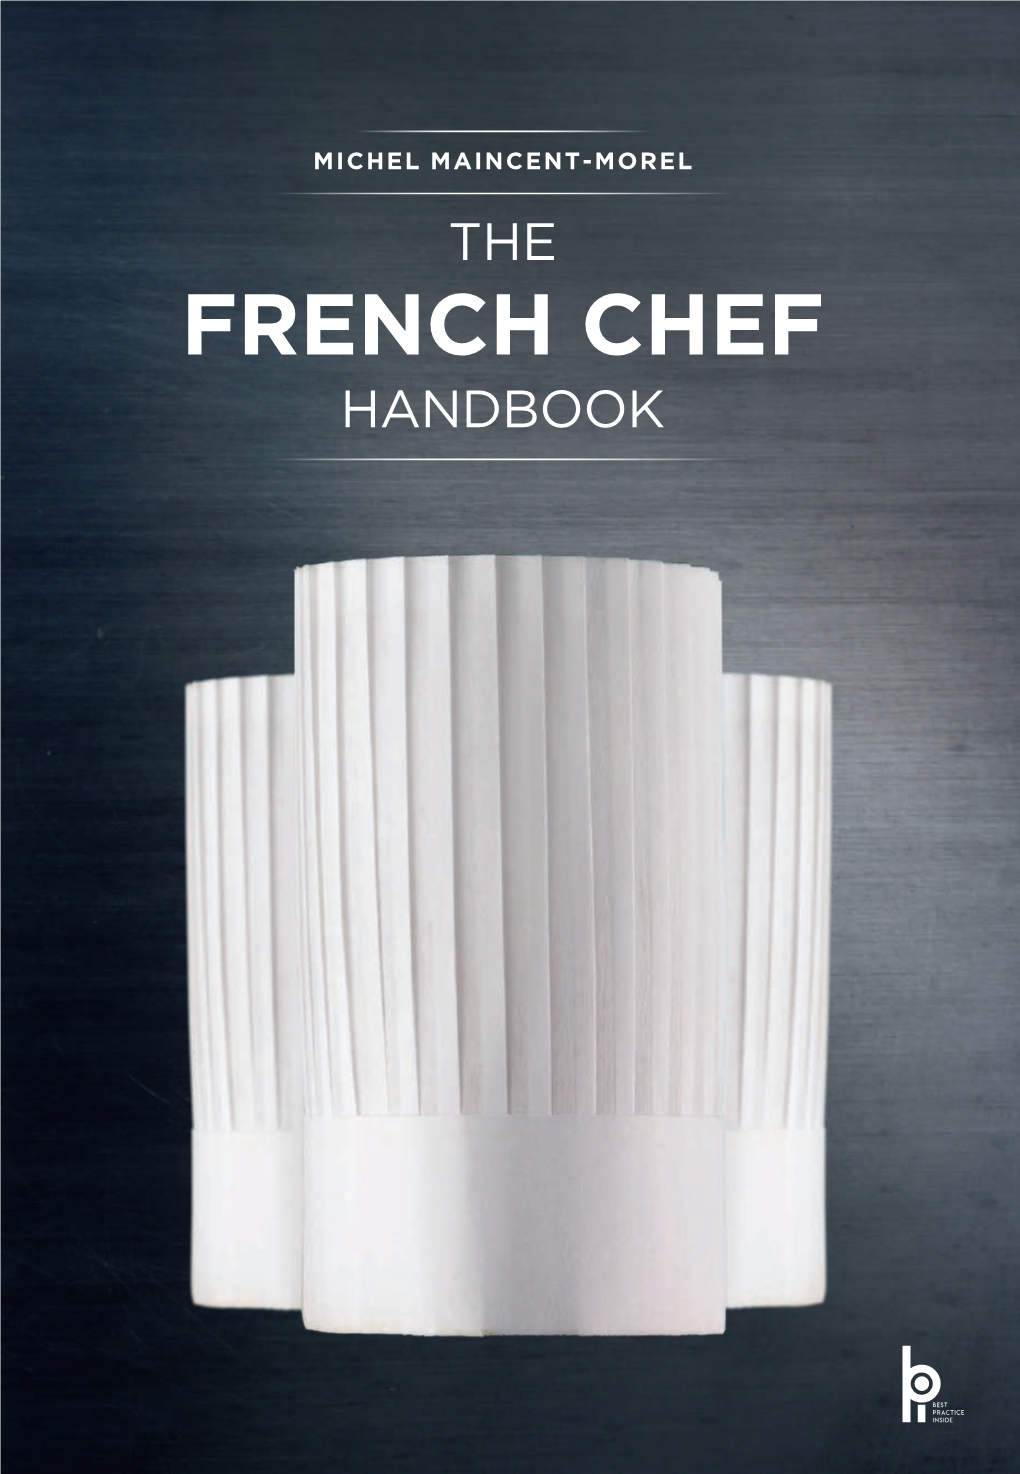 THE FRENCH CHEF HANDBOOK Chef Maincent-Morel Wrote Several Books (Best Practice Inside the Editions)